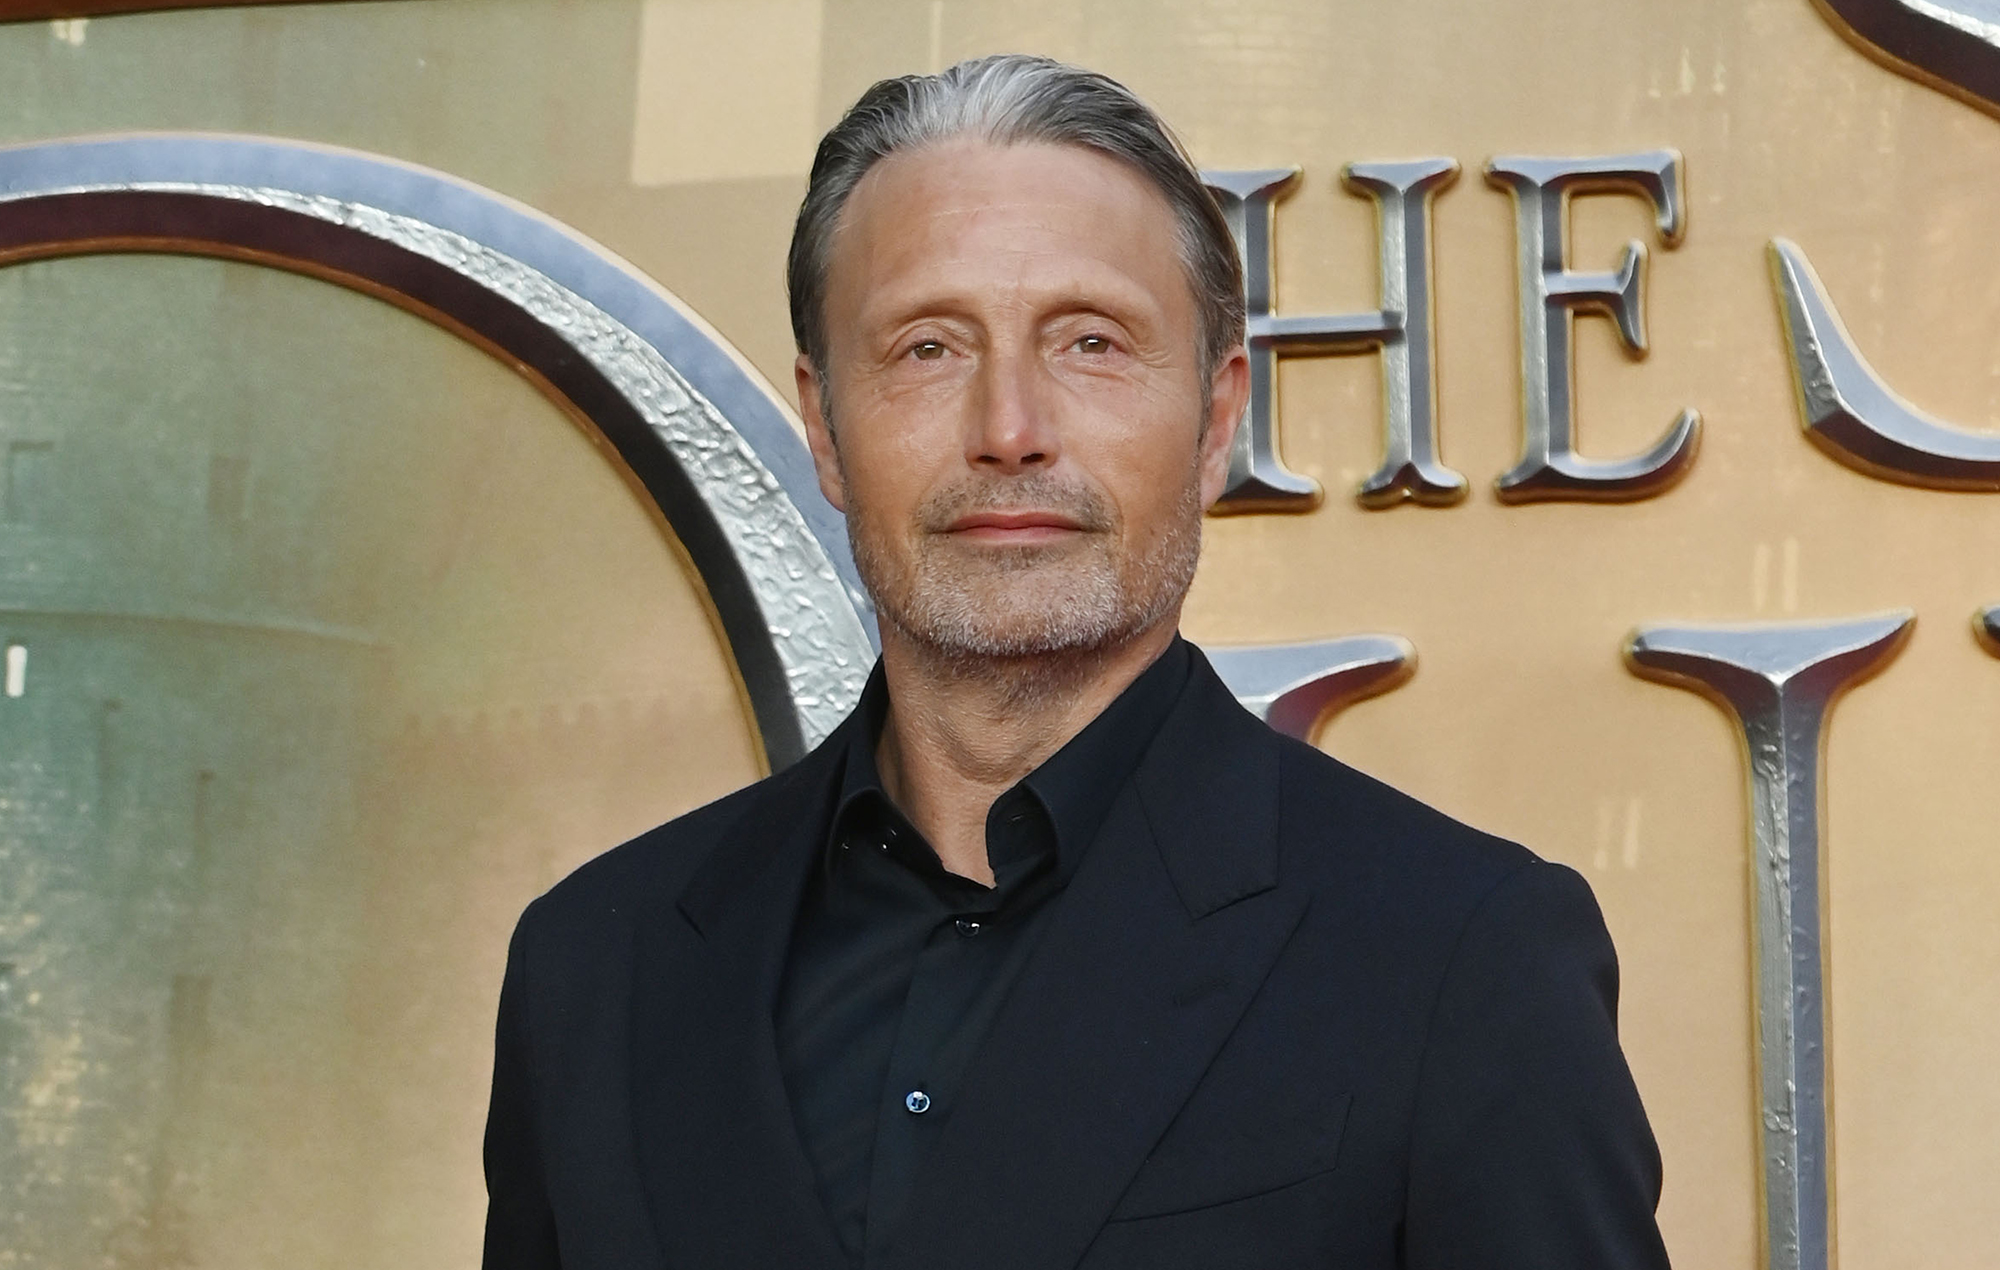 Mads Mikkelsen says it’s an “enormous honour” to be in ‘Indiana Jones 5’